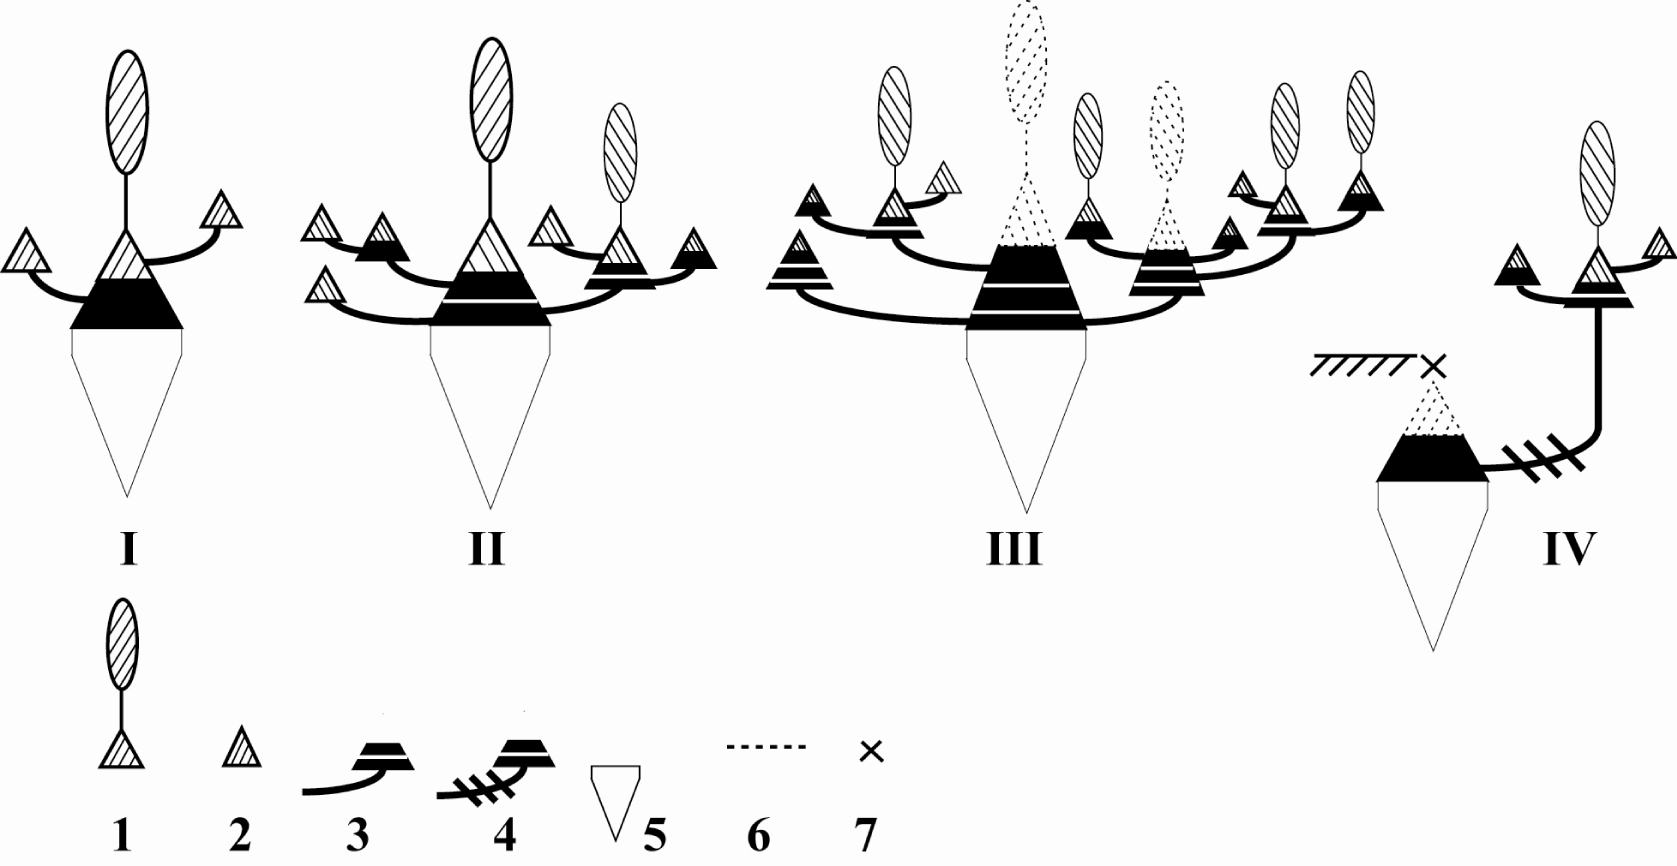 Fig. 1. Principal variants (I-IV) of Crambe koktebelica basic architectural model: 1 – annual semi-rosette flowering shoot; 2 – annual rosellate shoot; 3 – minimoresids (white lines indicate the boundaries of annual growth); 4 – vikarioresids; 5 – taproot system; 6 – eliminated (died) structures; 7 – eliminated apical bud.